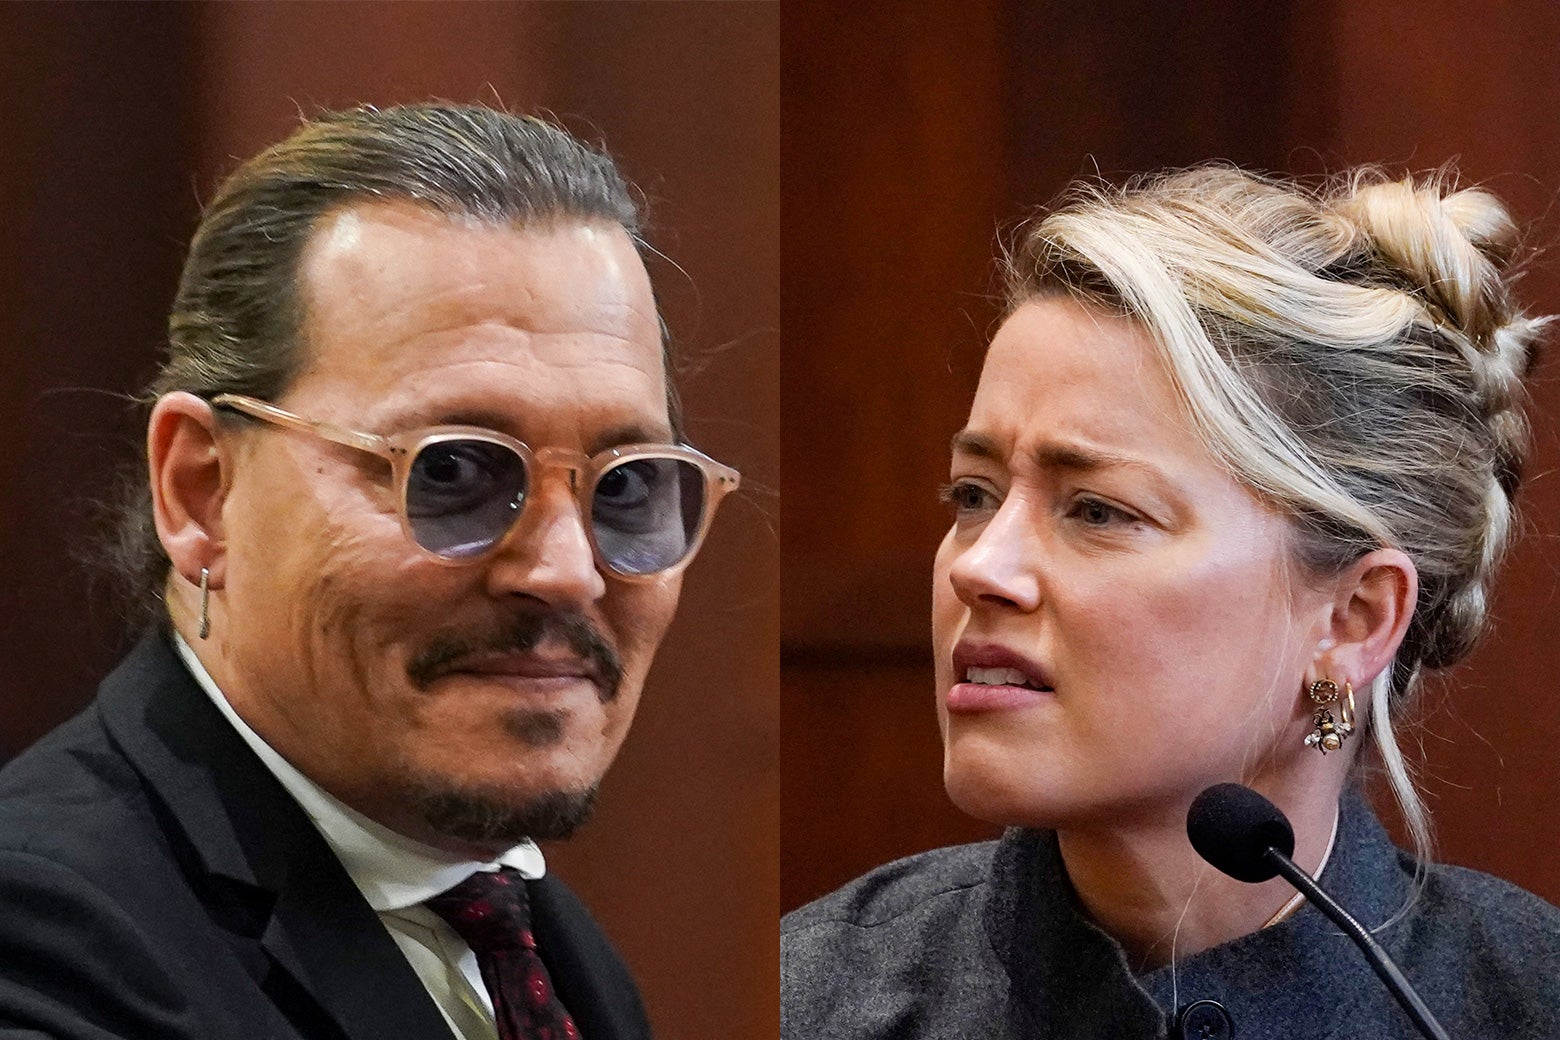 Johnny Depp Amber Heard how the trial and verdict duped America. image image